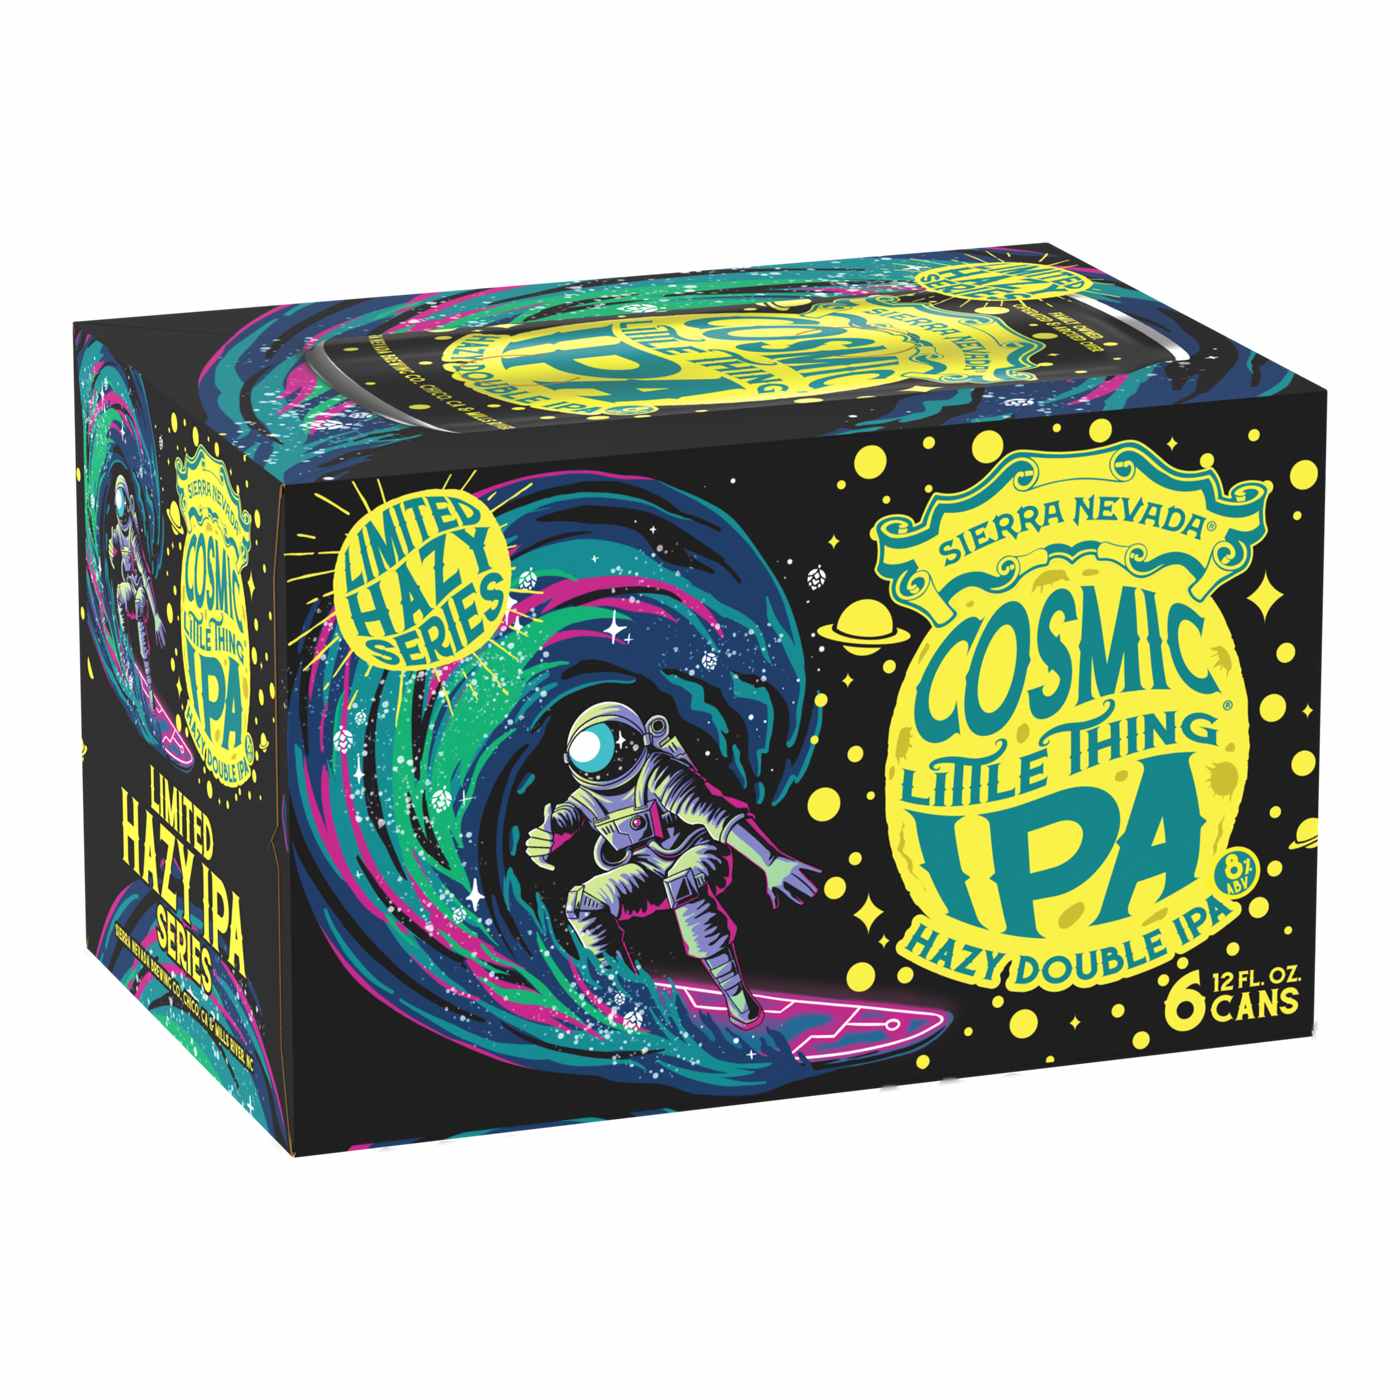 Sierra Nevada Cosmic Little Thing Hazy Double IPA, 6 pk Cans; image 1 of 4